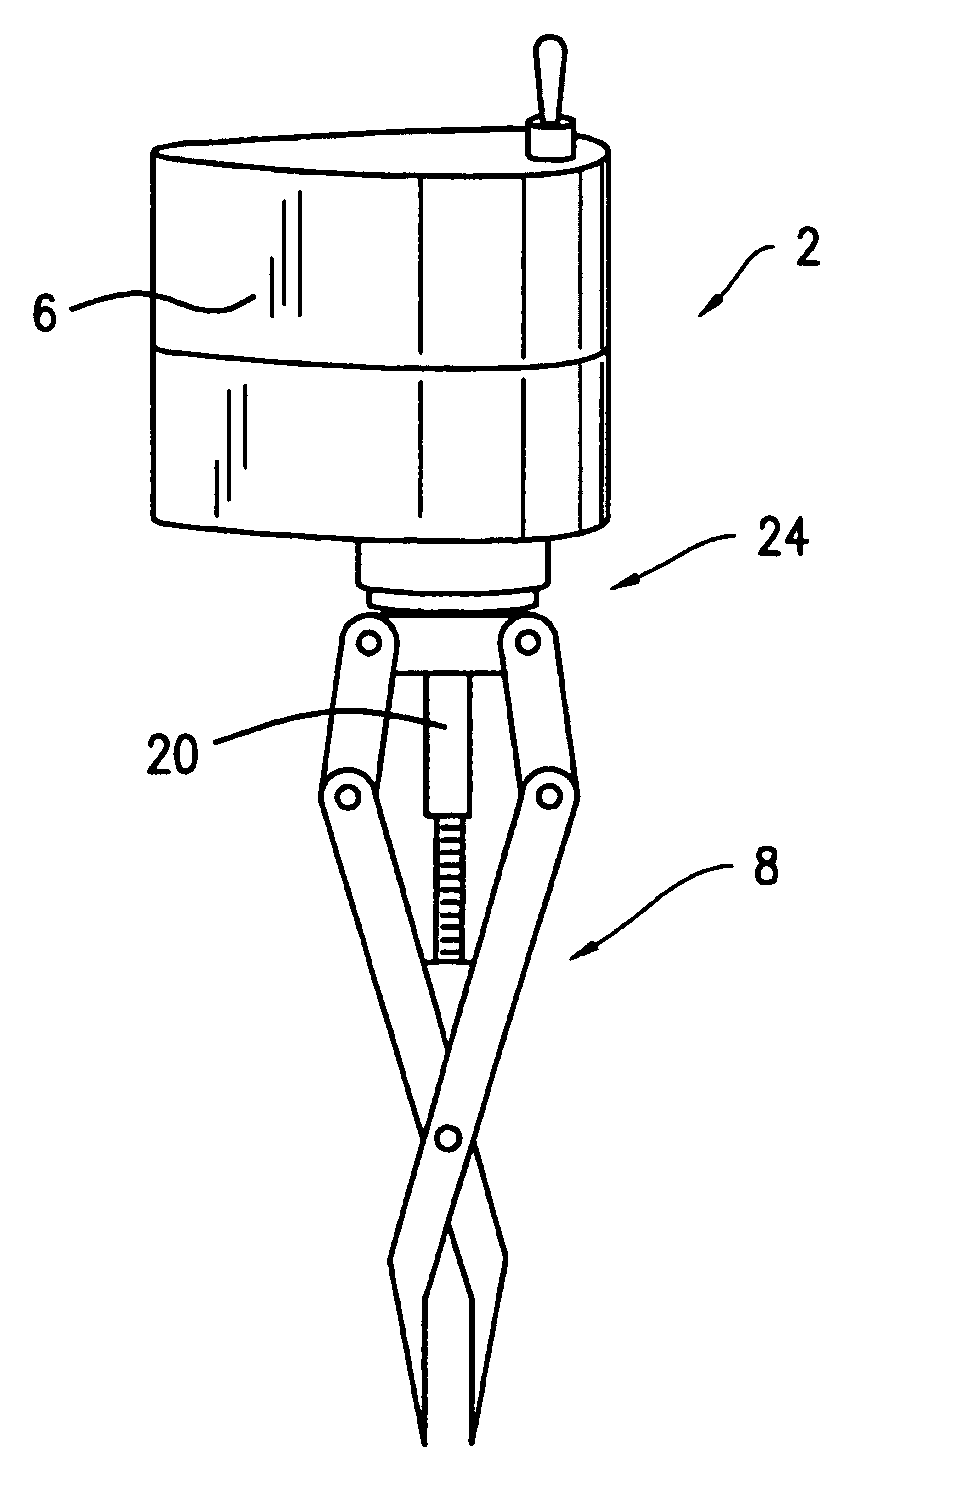 Apparatus and method for measuring instability of a motion segment unit of a spine